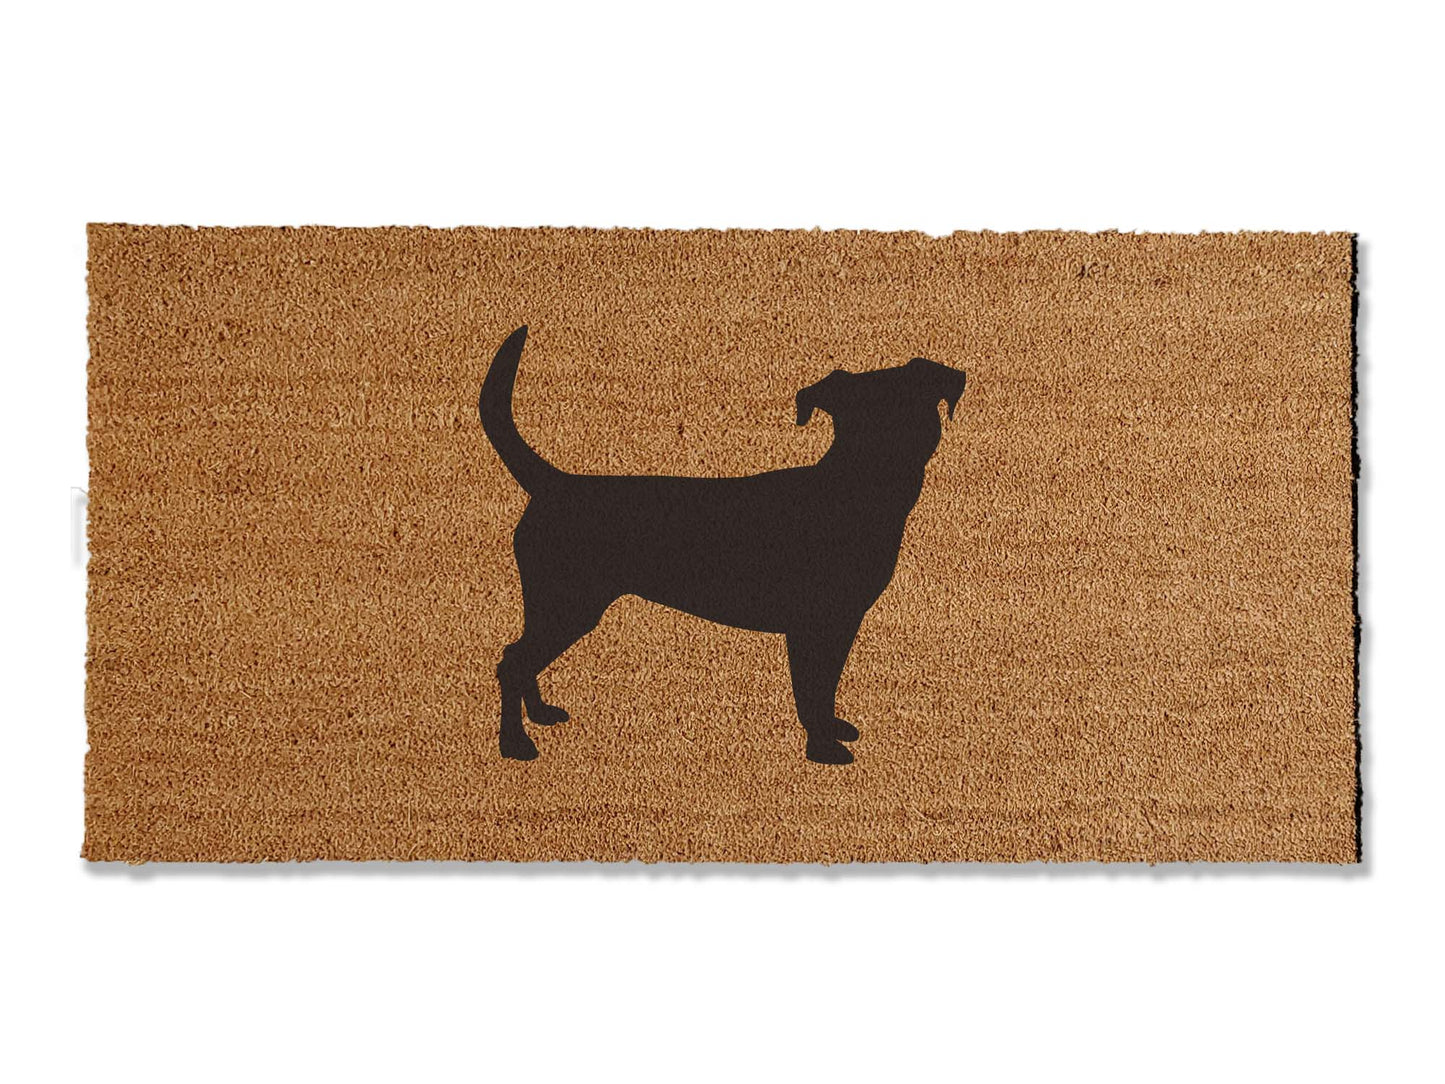 Welcome guests with our coir welcome doormat, featuring a charming Jack Russell Terrier design. Available in multiple sizes, this is the perfect gift for Terrier lovers, adding a touch of canine charm that effortlessly spruces up your entryway.